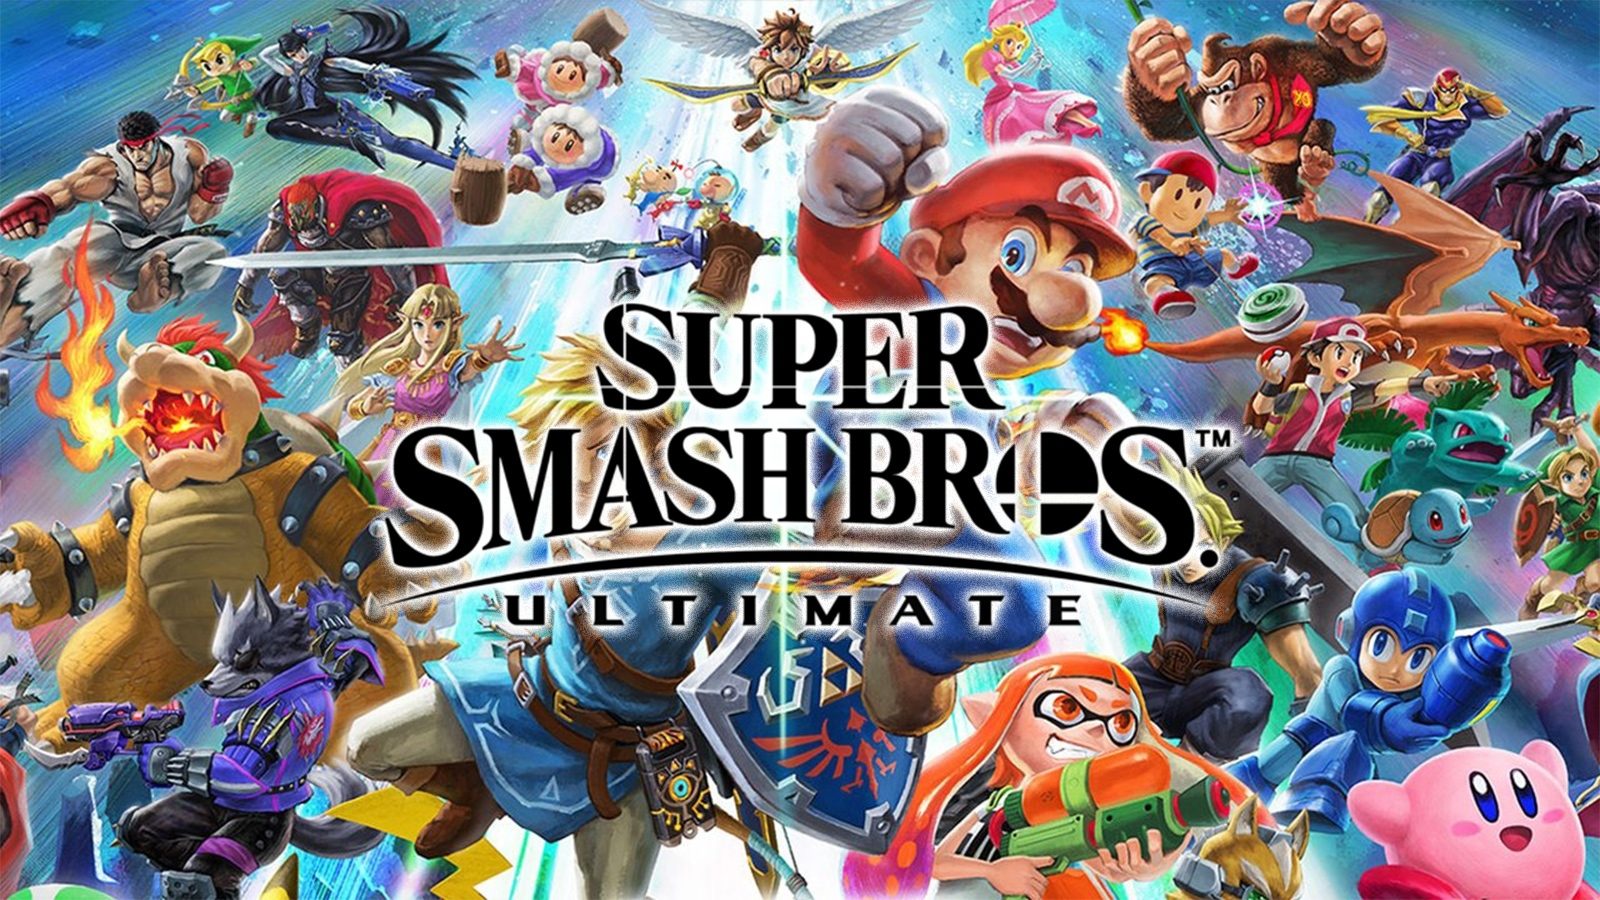 Super Smash Bros. Ultimate Update 4.0.0 Full Patch Notes